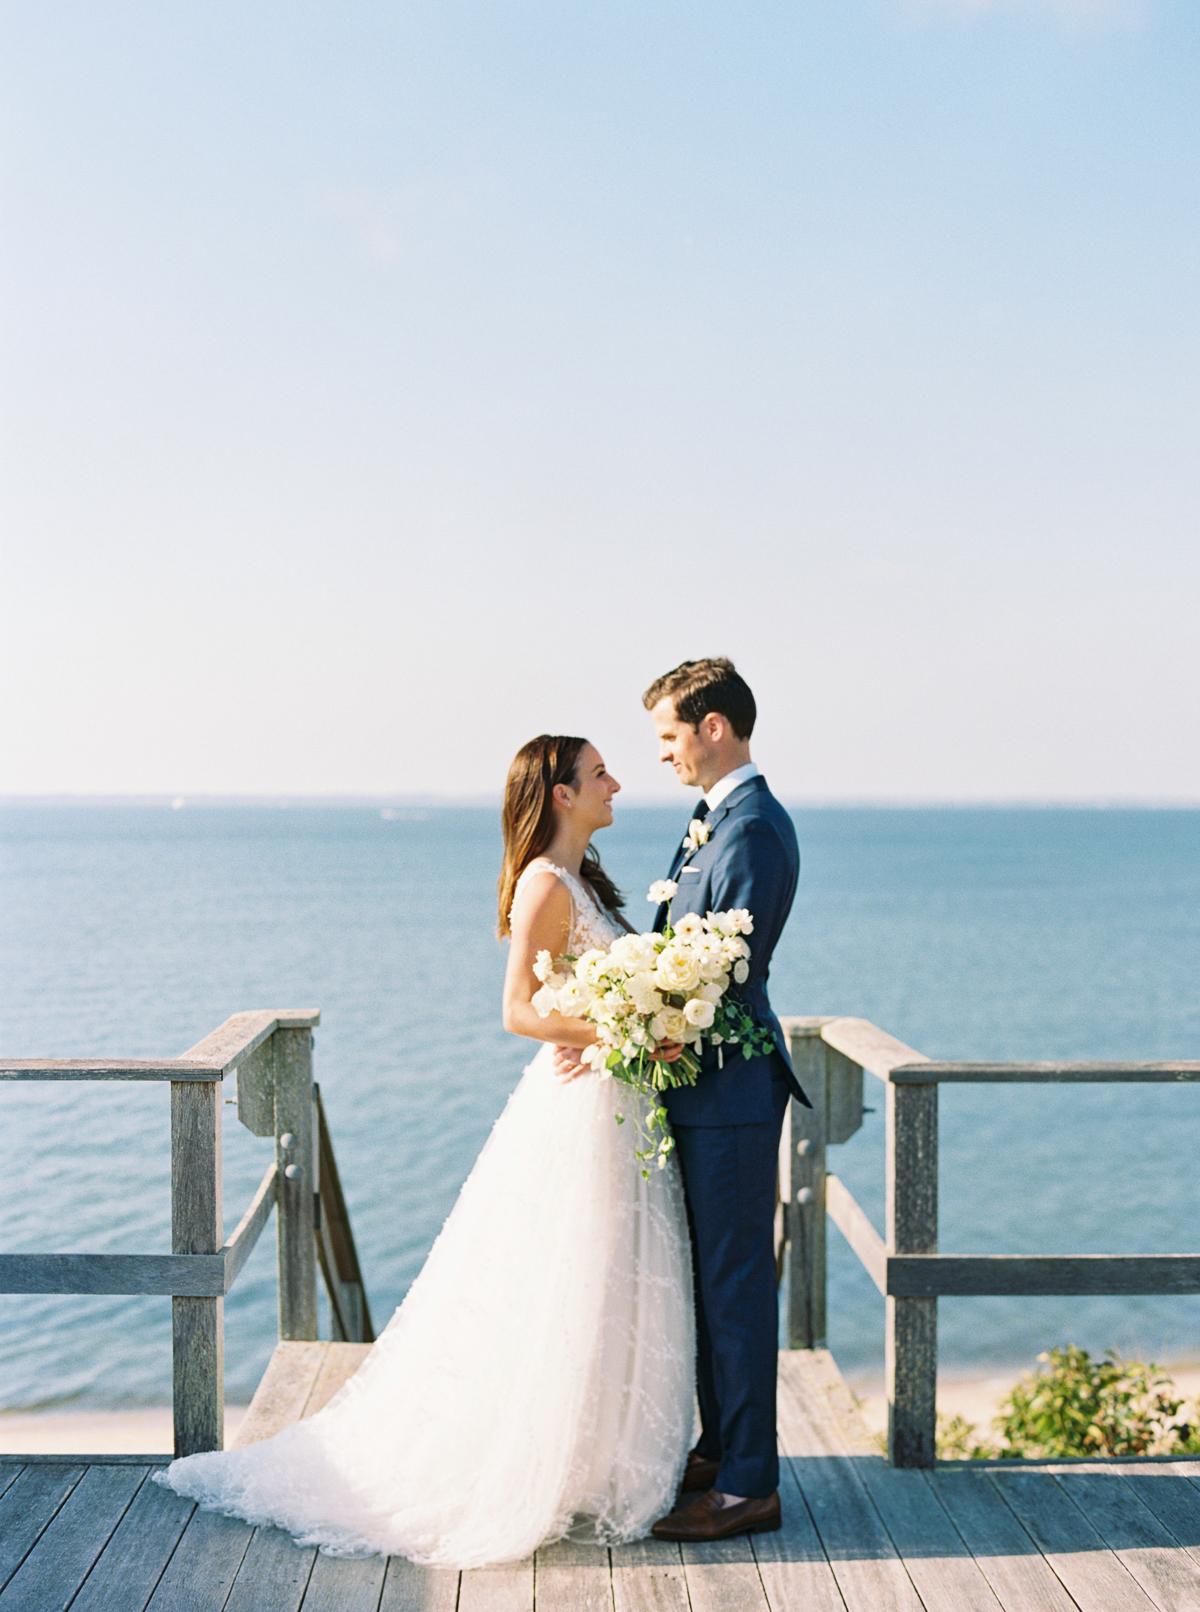 You Need to See This “Coastal Grandmother” Approved Southampton Wedding